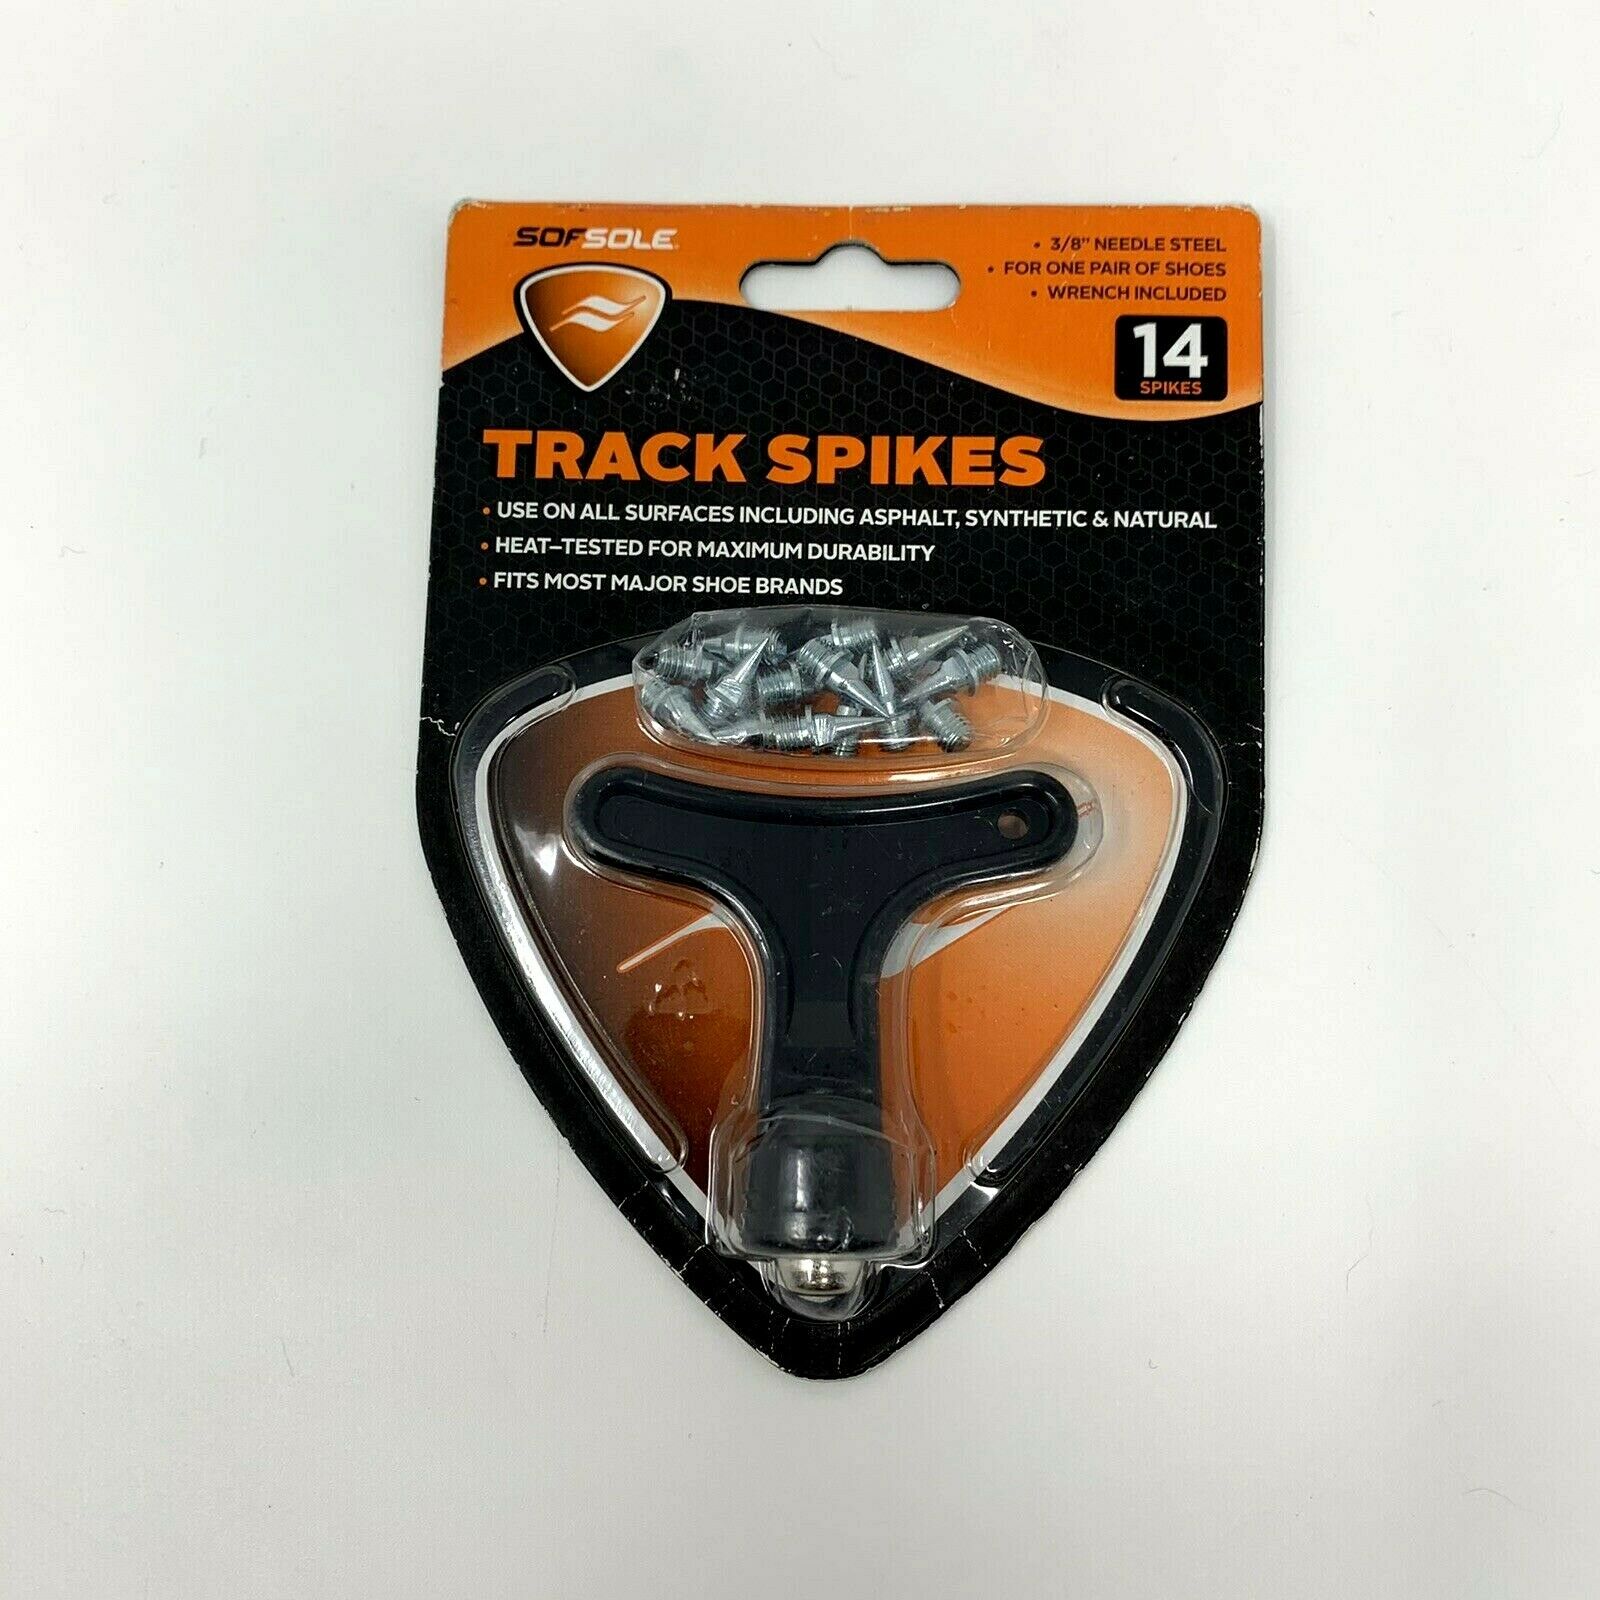 Replacement Sof Sole Steel Track Spikes Running, 3/8" Needle Steel, 14 Spikes